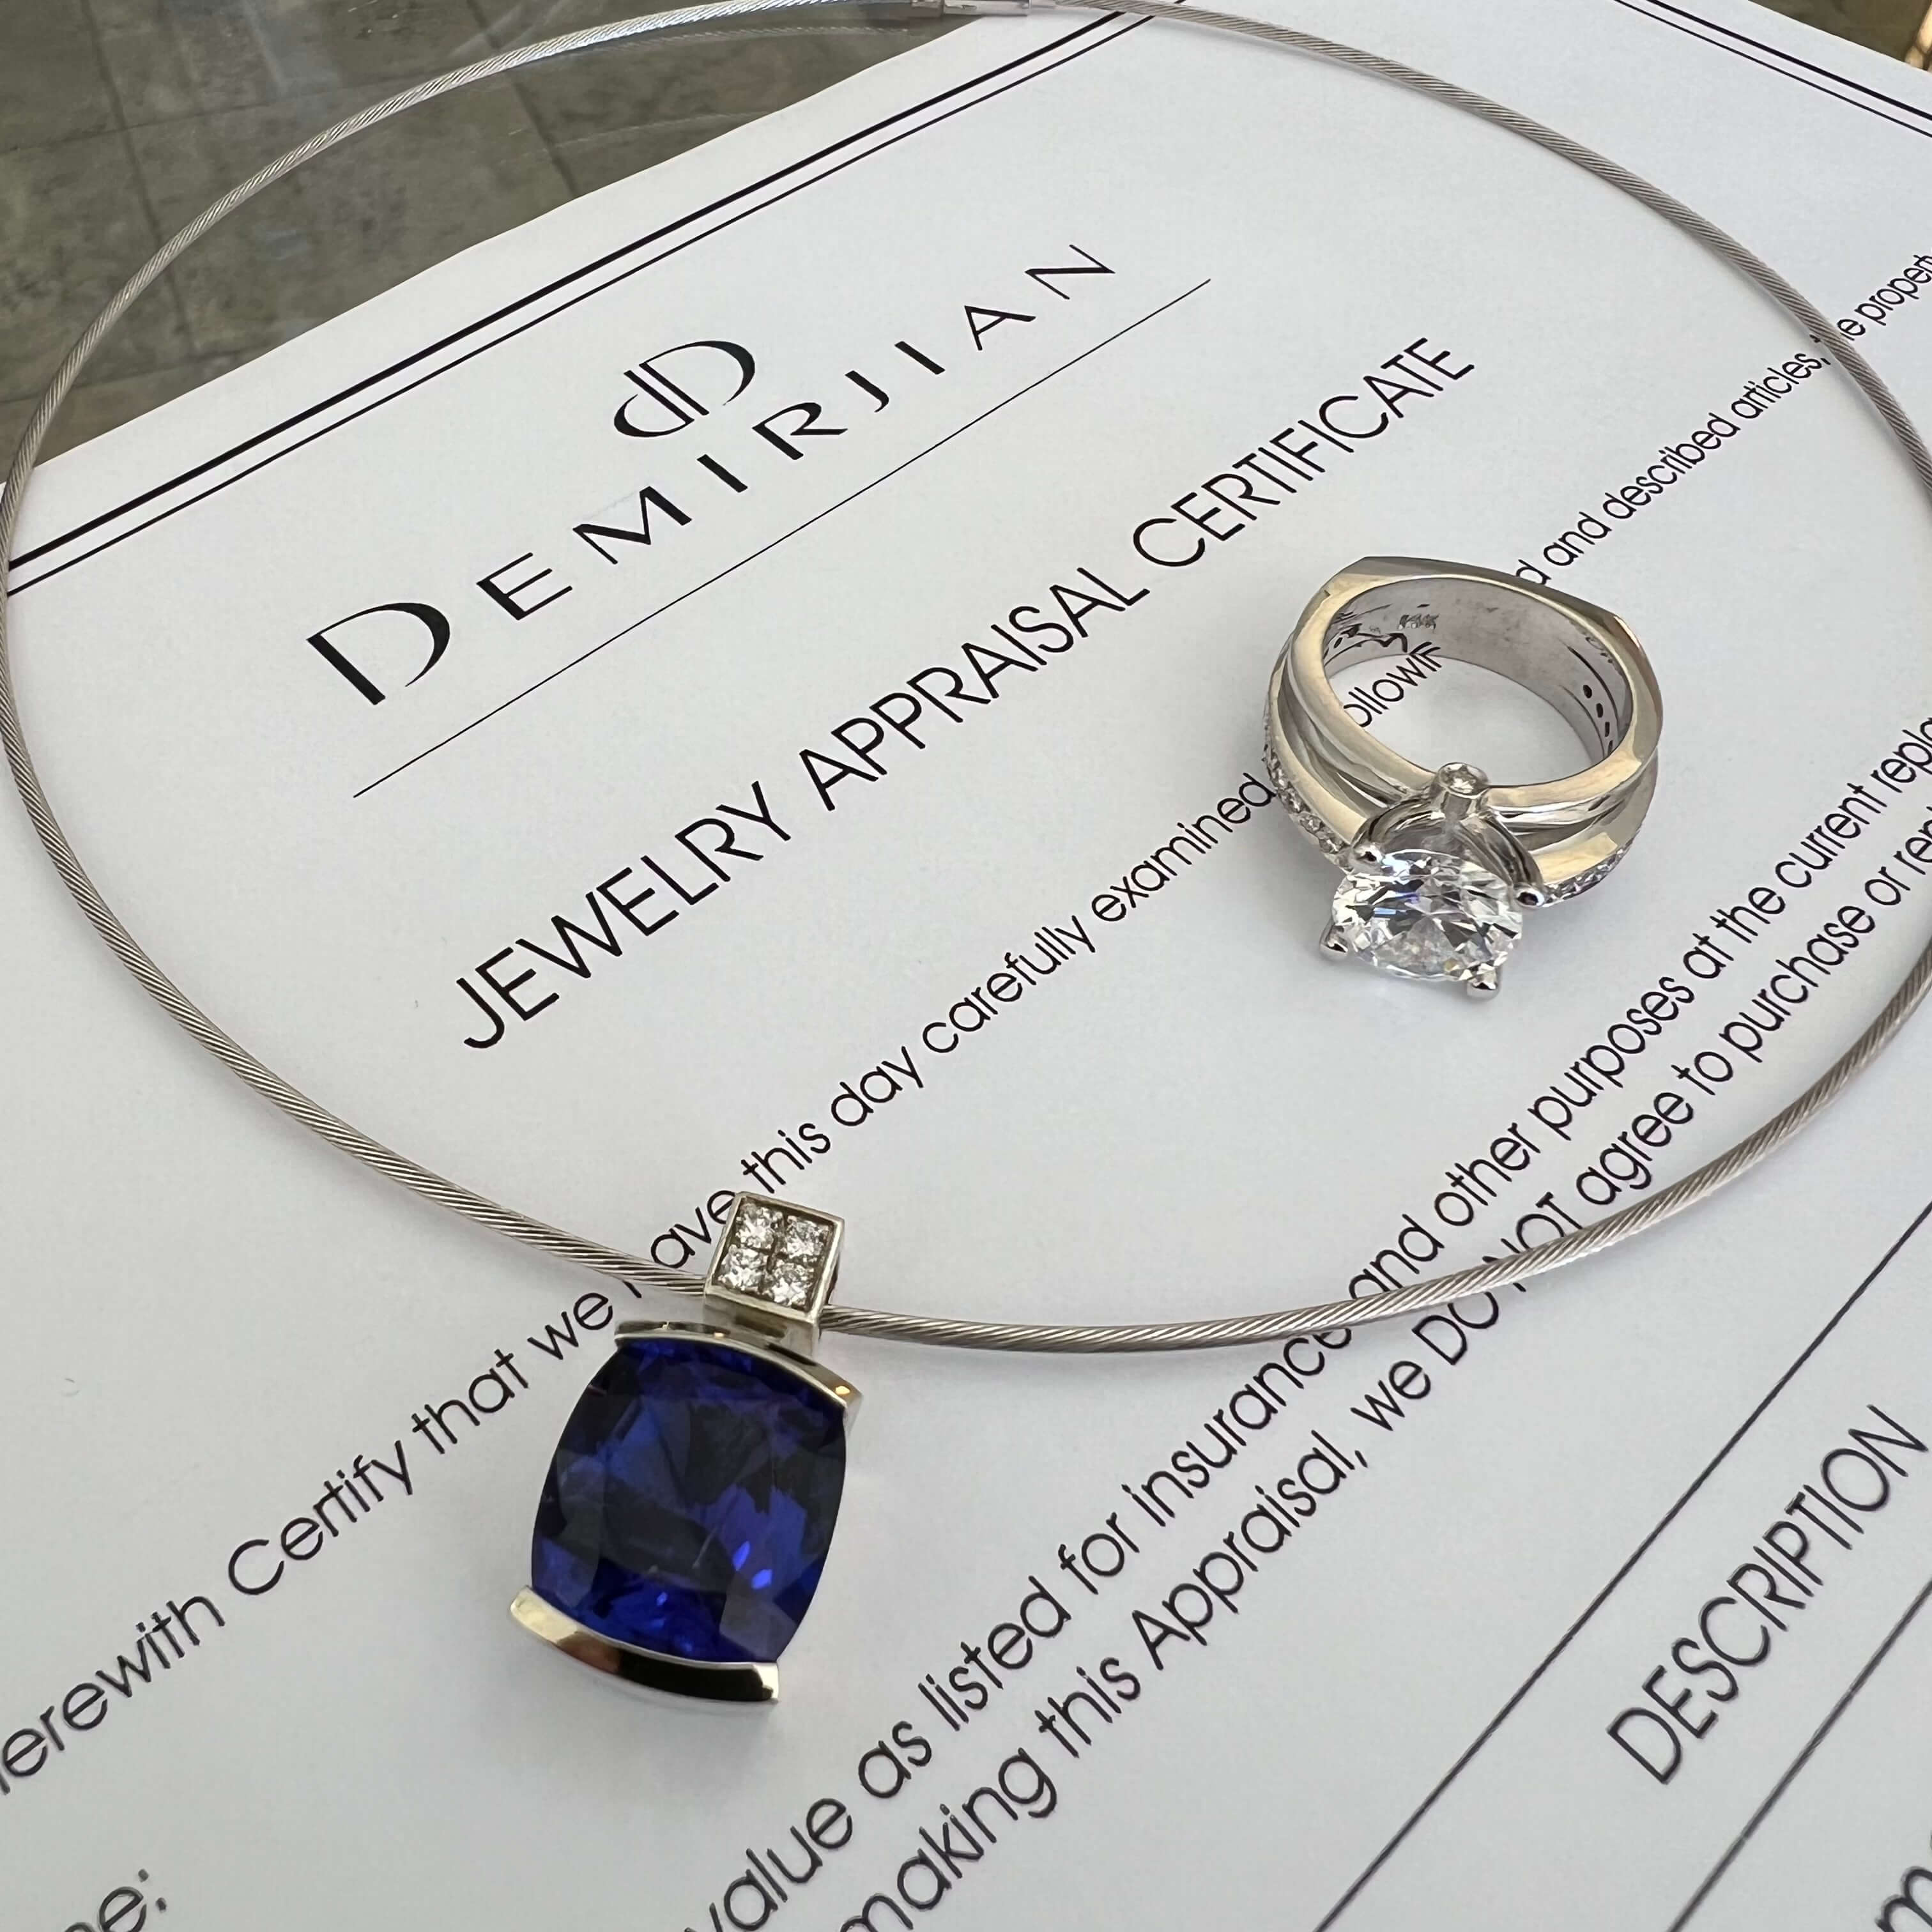 Demirjian Jewelry Design custom necklace and diamond ring with official appraisal.